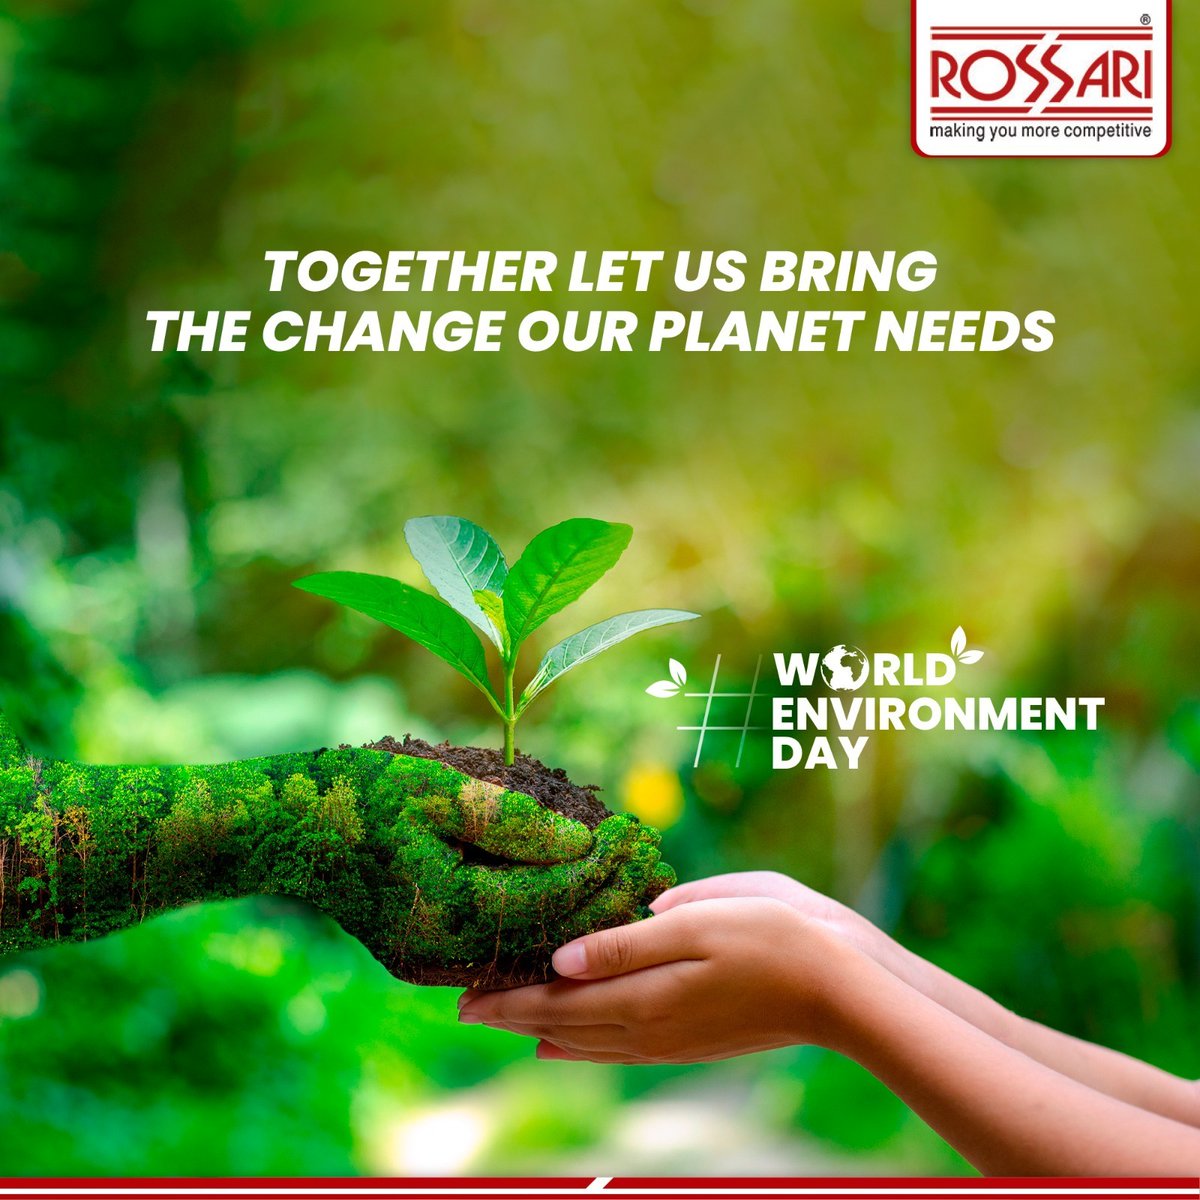 It's time to move above and beyond words to safeguard our #planet. This #WorldEnvironmentDay, let's empower our planet by embracing #sustainable choices that #nurture sustainable #growth.
#rossari #biotechsolutions #chemcial #enviorment #biotech #greensolutions #sustainability